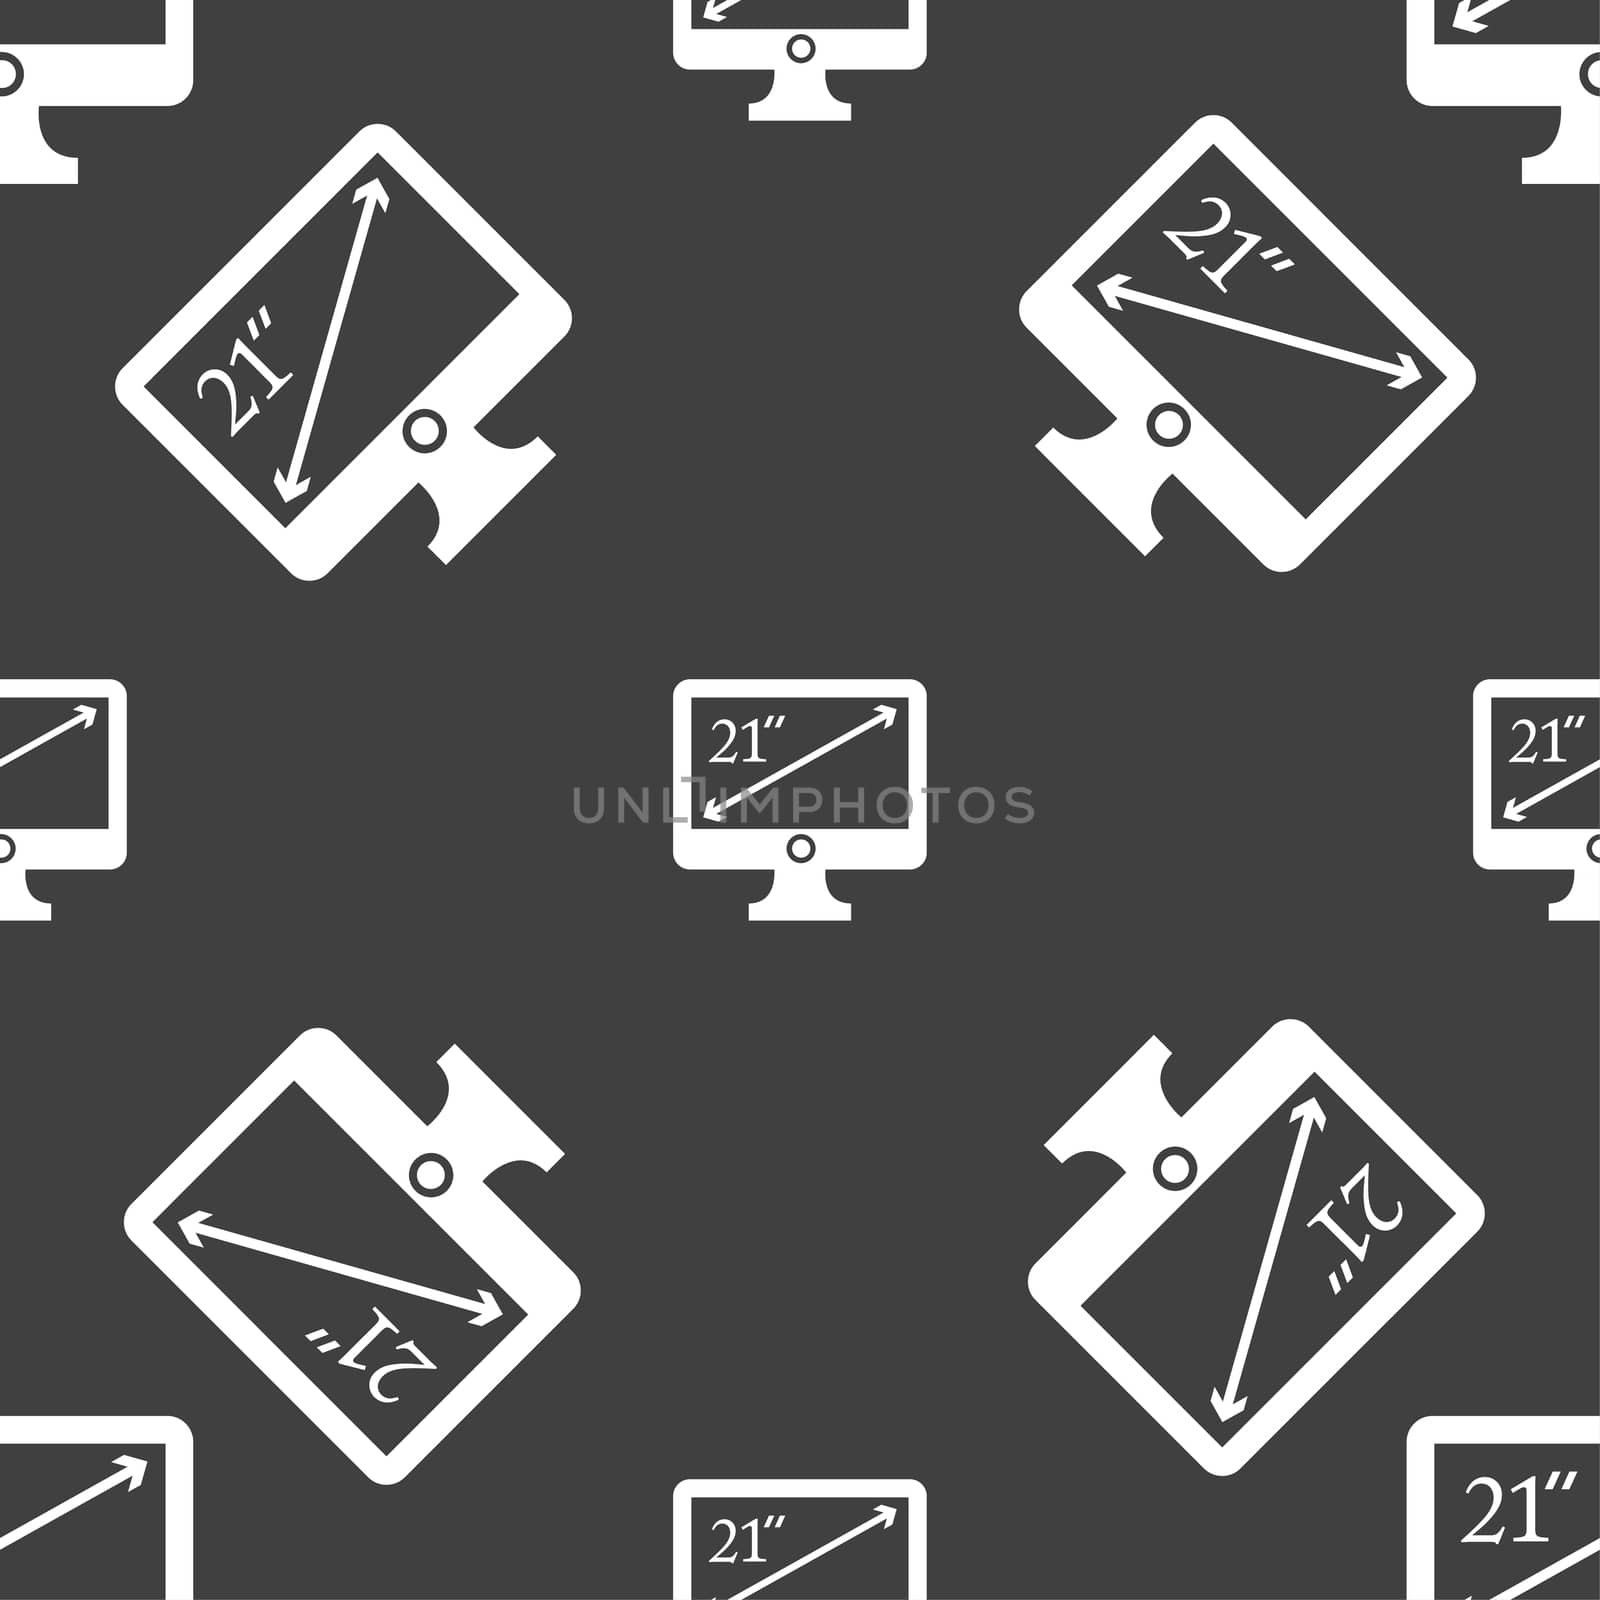 diagonal of the monitor 21 inches icon sign. Seamless pattern on a gray background.  by serhii_lohvyniuk